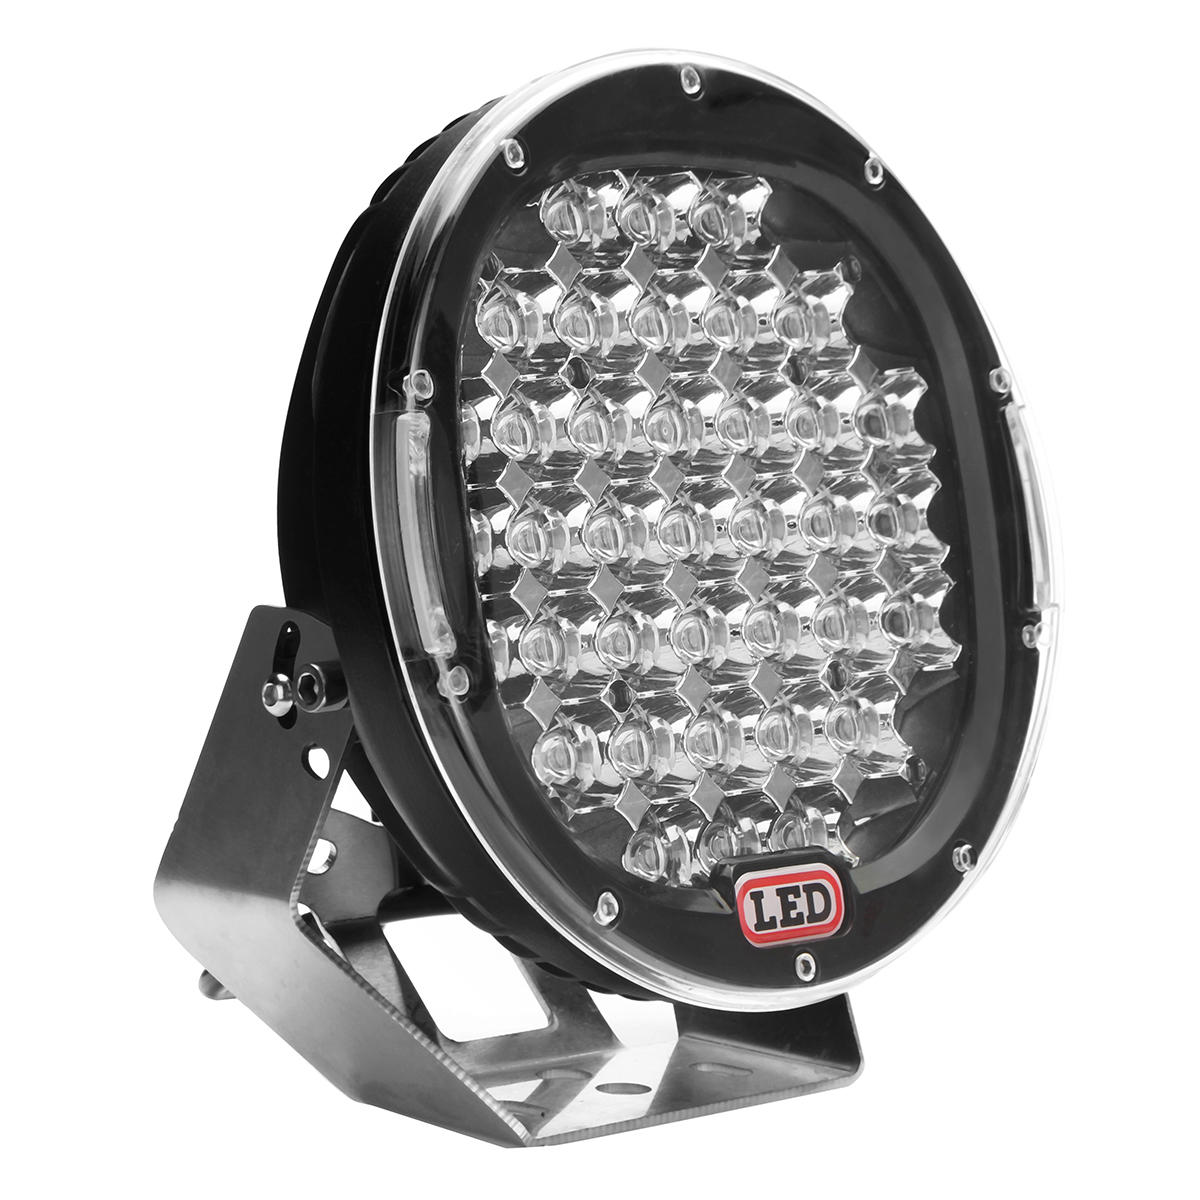 185W Spot LED Work Light Driving Fog 9" Headlight Offroad Fit For SUV Jeep